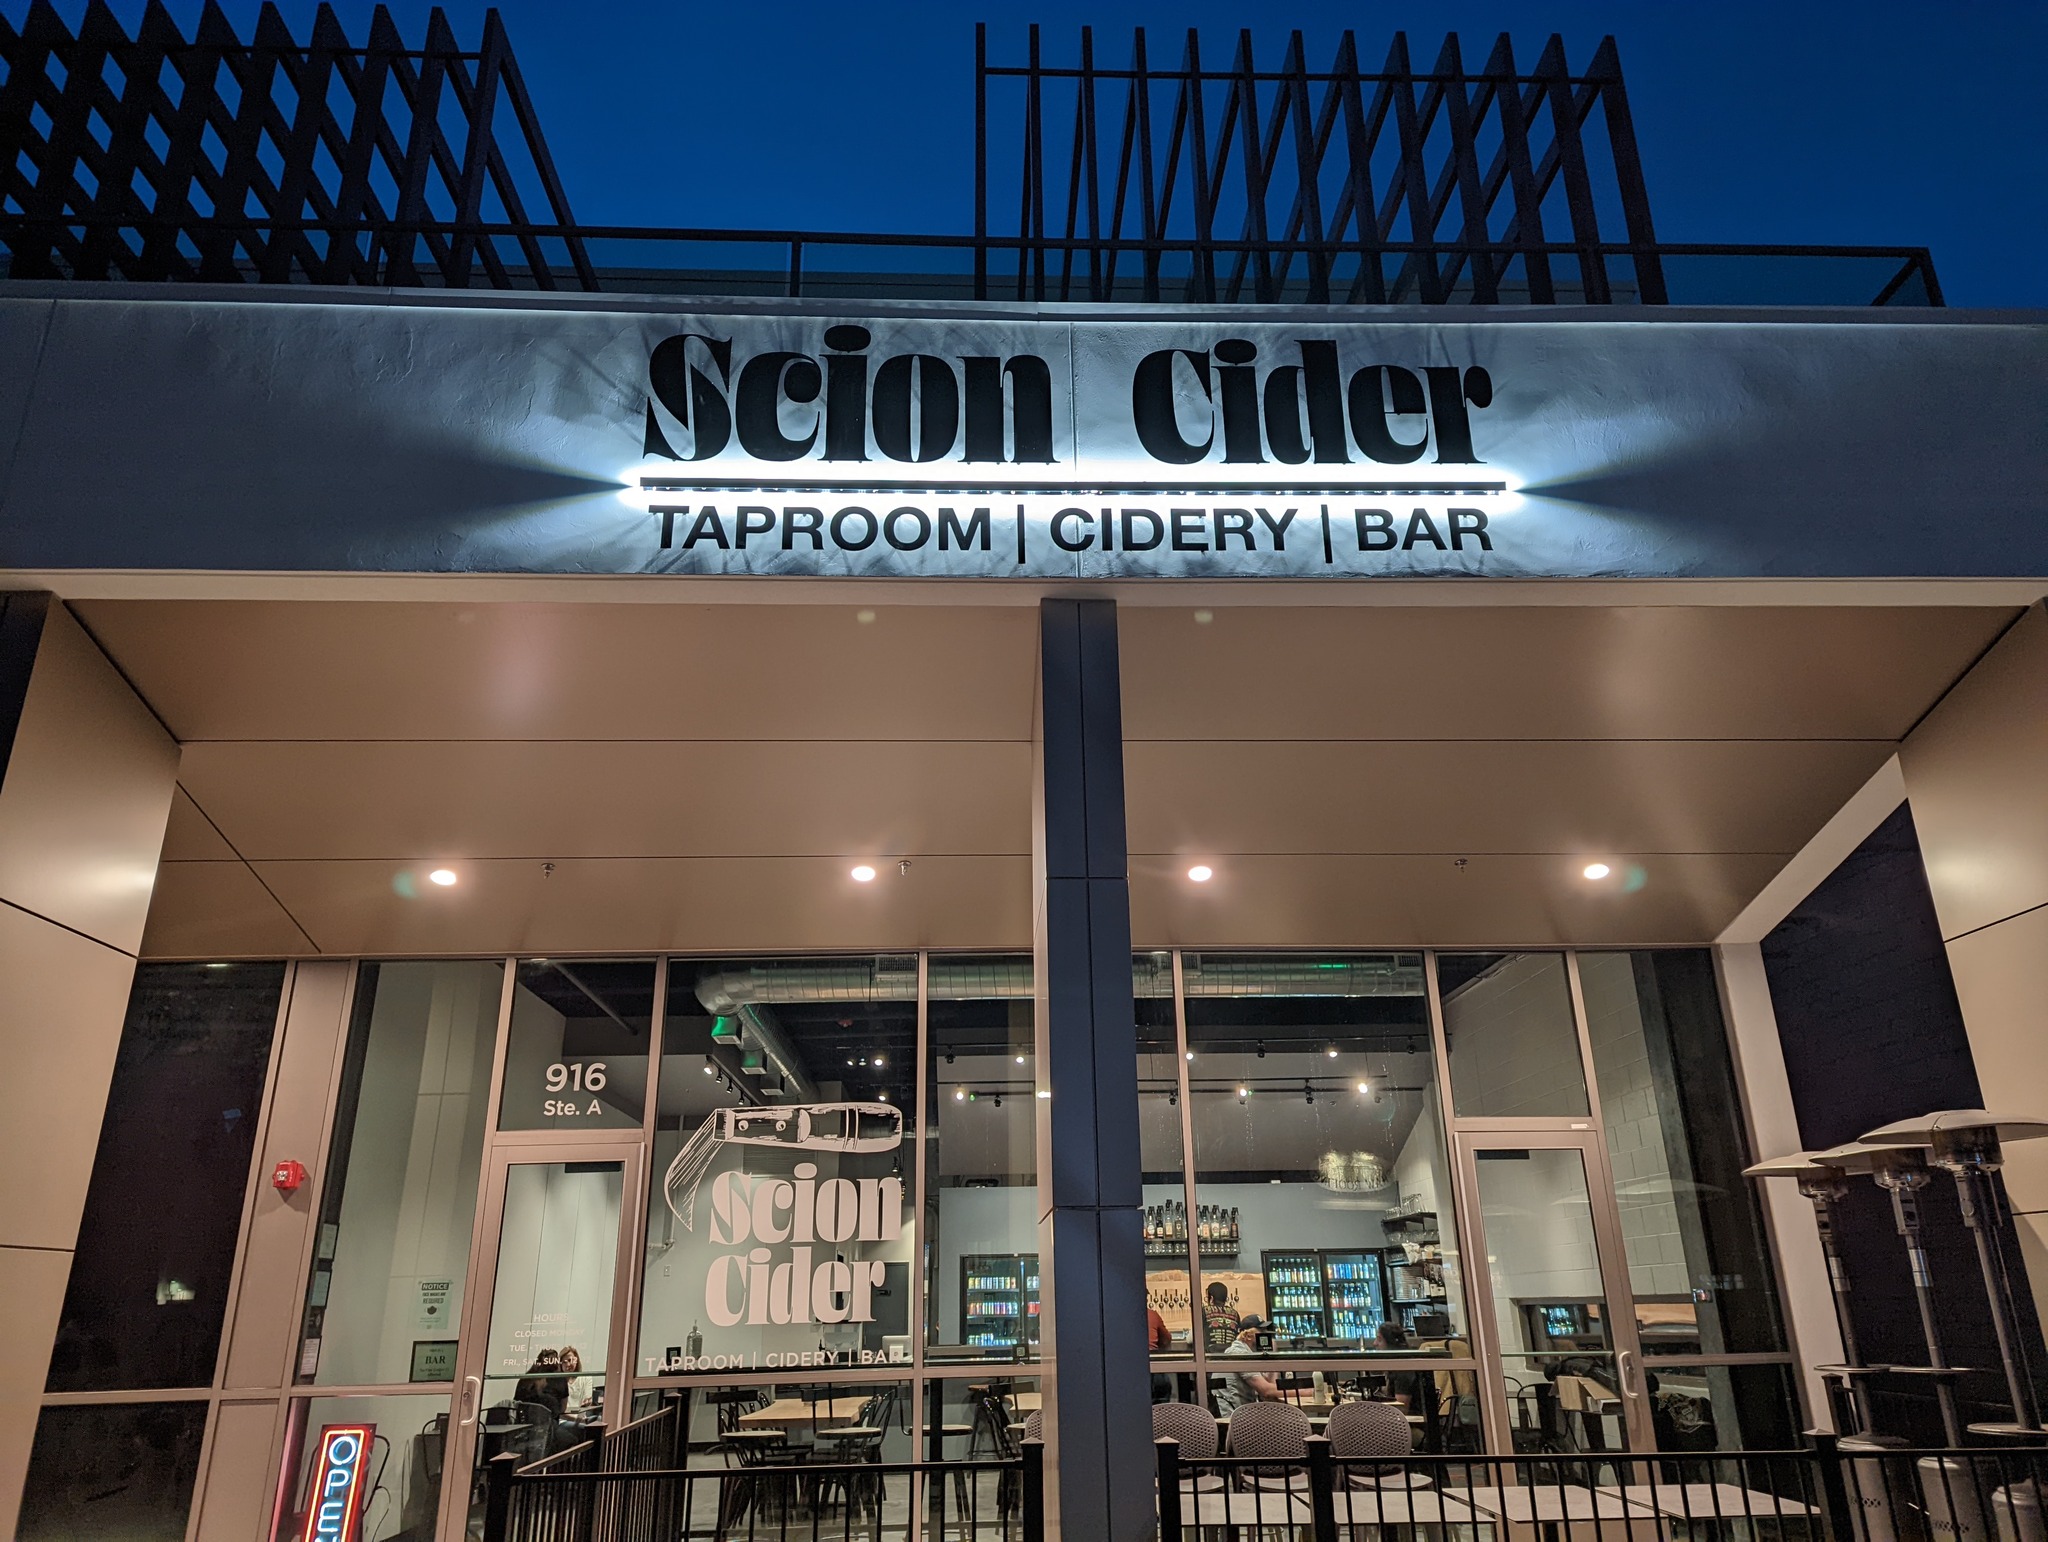 Scion Cider Bar best-things-to-do-in-salt-lake-city-at-night